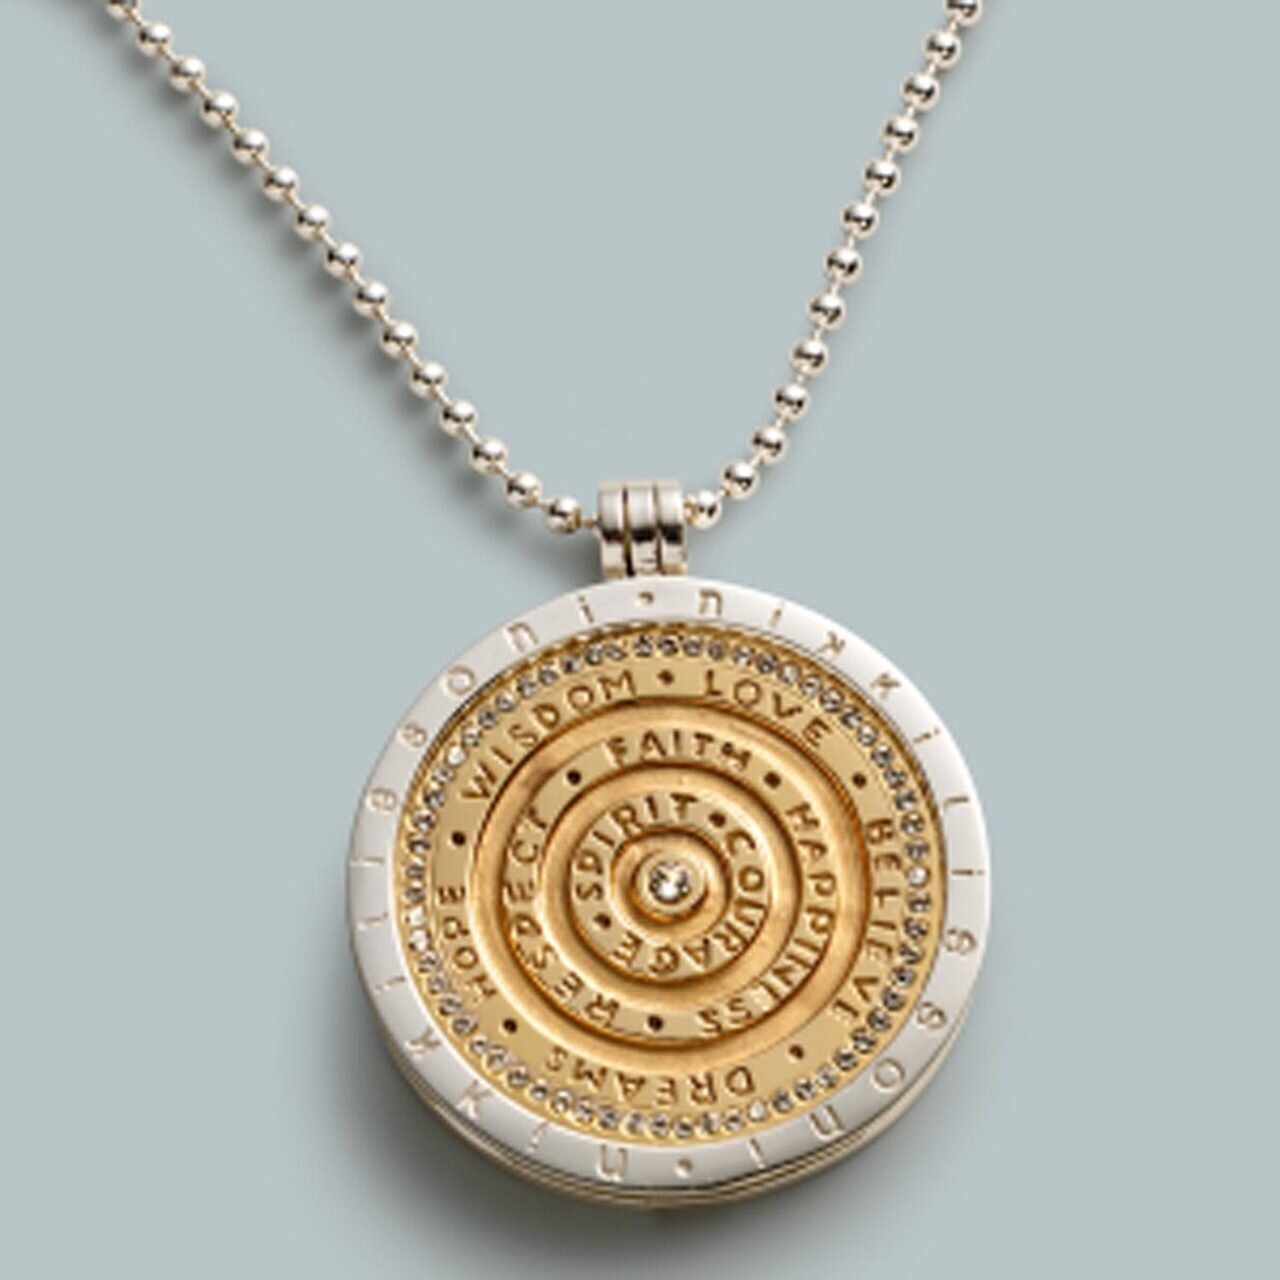 Nikki Lissoni 43mm Coin Inside 45mm Pendant On 70cm Length Chain with Deluxe Gift Box Bag & Pouch SN1202